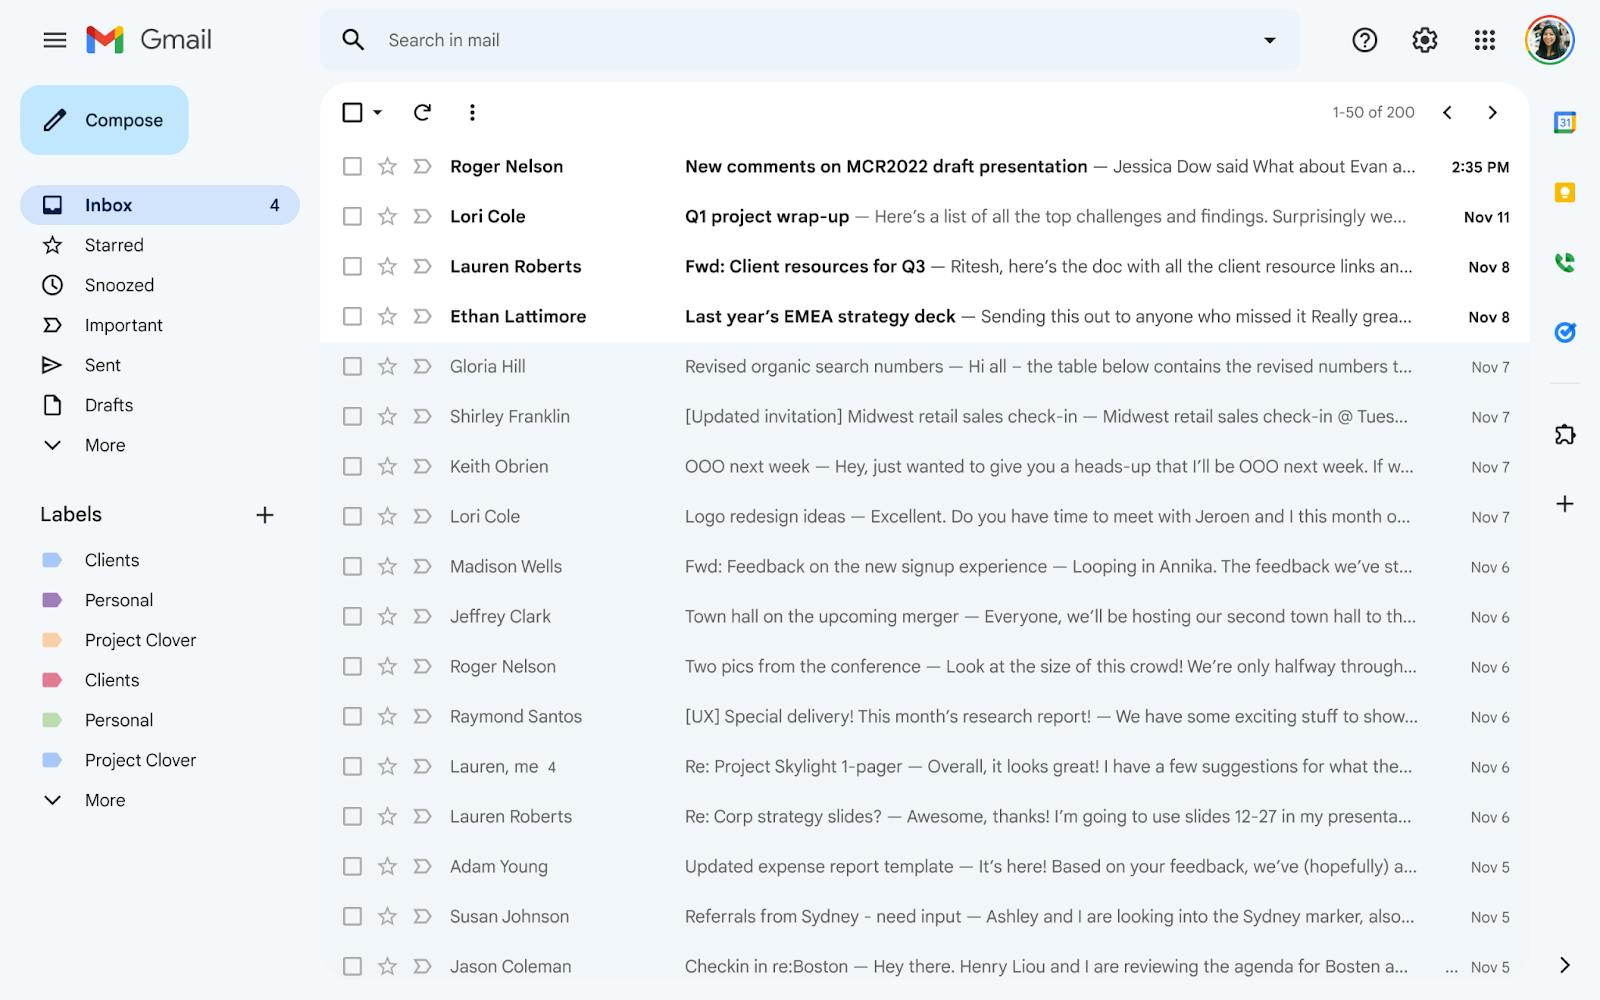 Photo of Gmail interface showing sample emails